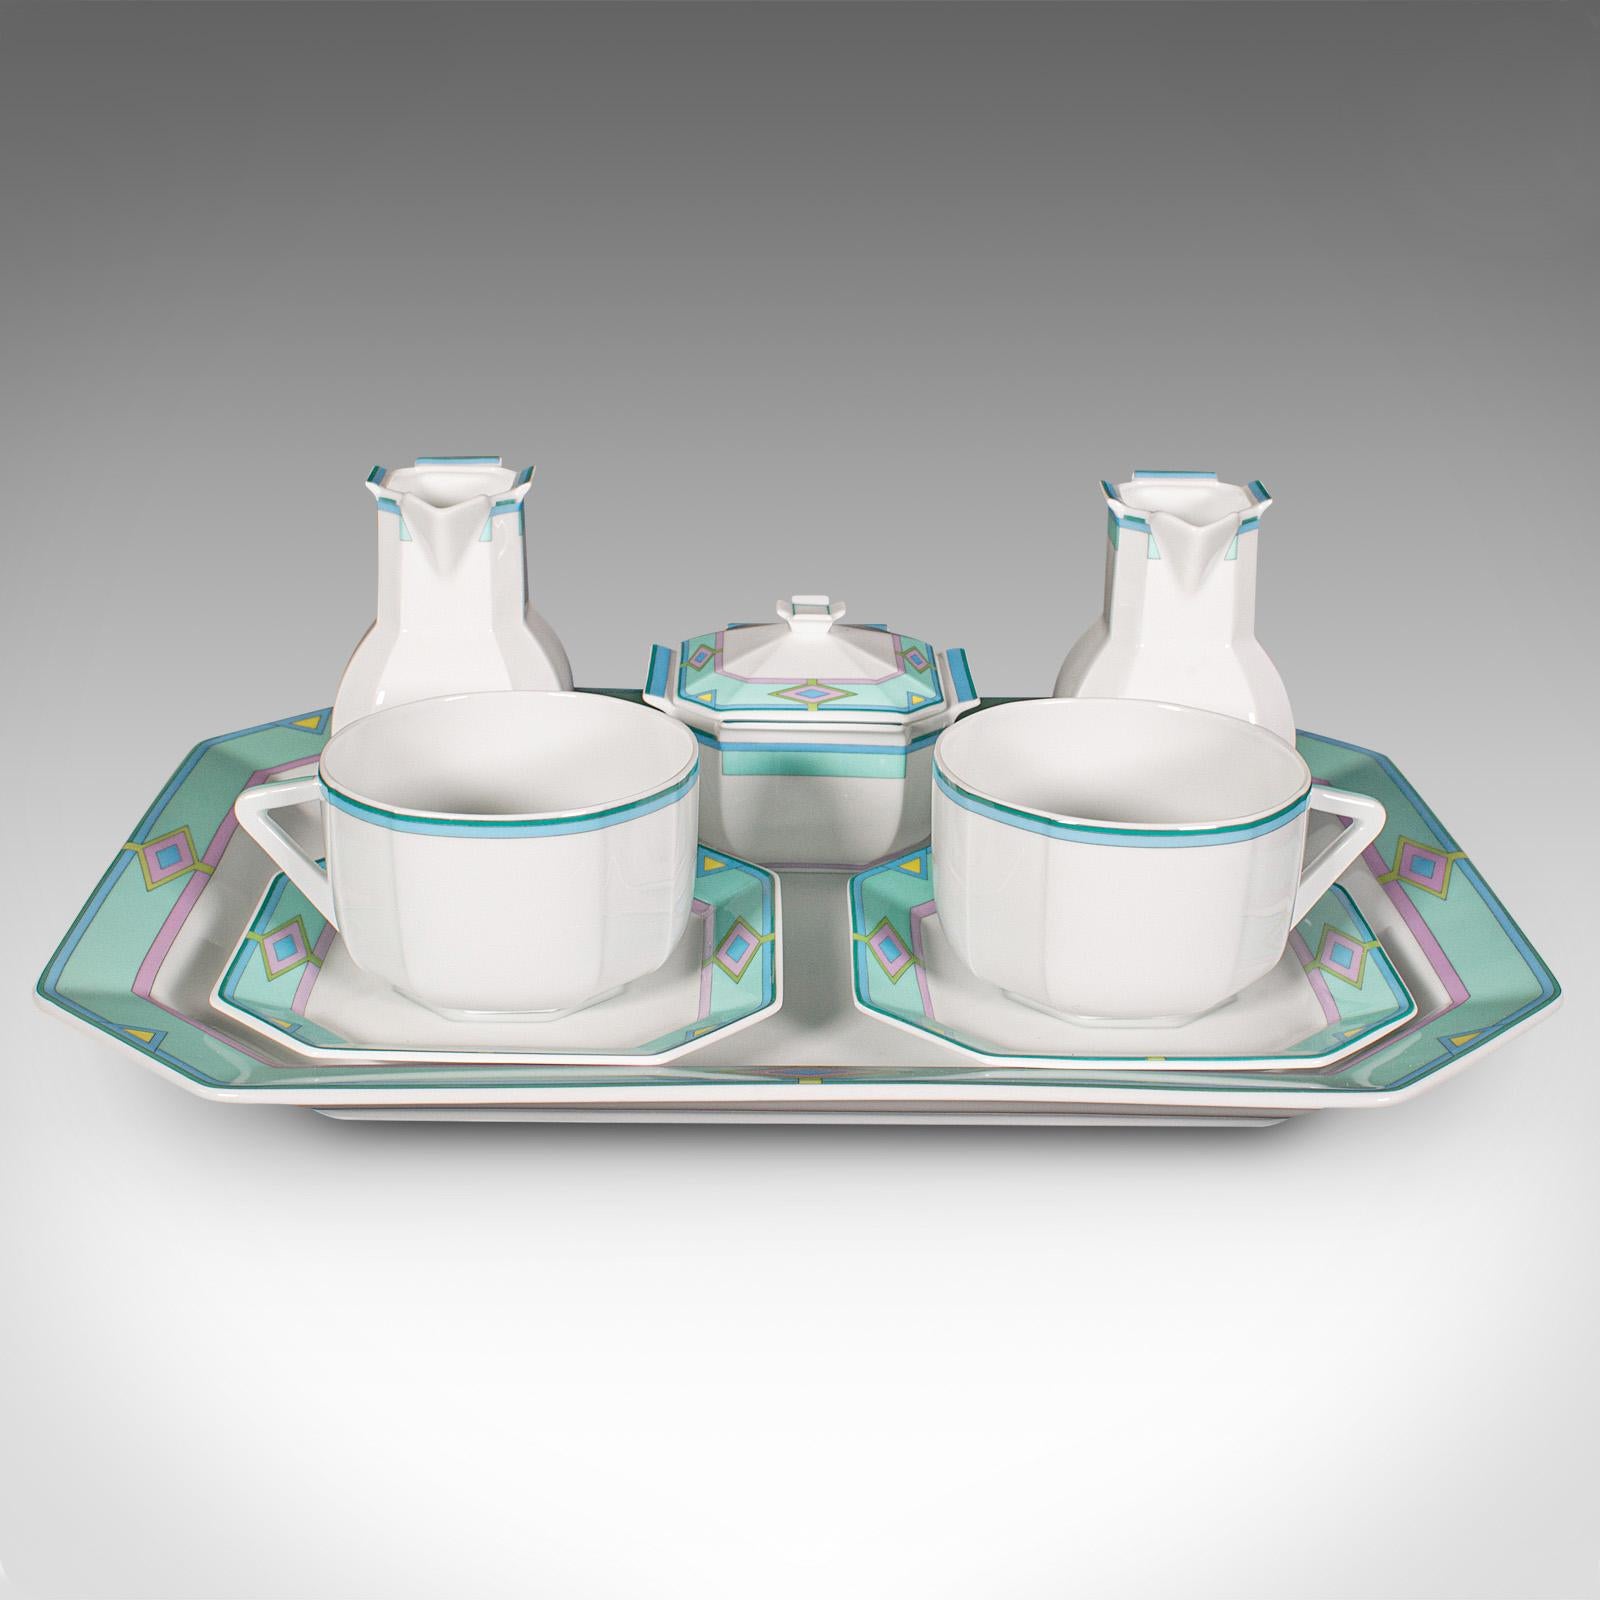 This is a vintage cabaret afternoon tea set. A French, ceramic serving tray and tea cups in Art Deco revival taste, dating to the late 20th century, circa 1990.

Striking and temptingly colourful tea set, a treat for the lounge
Displays a desirable